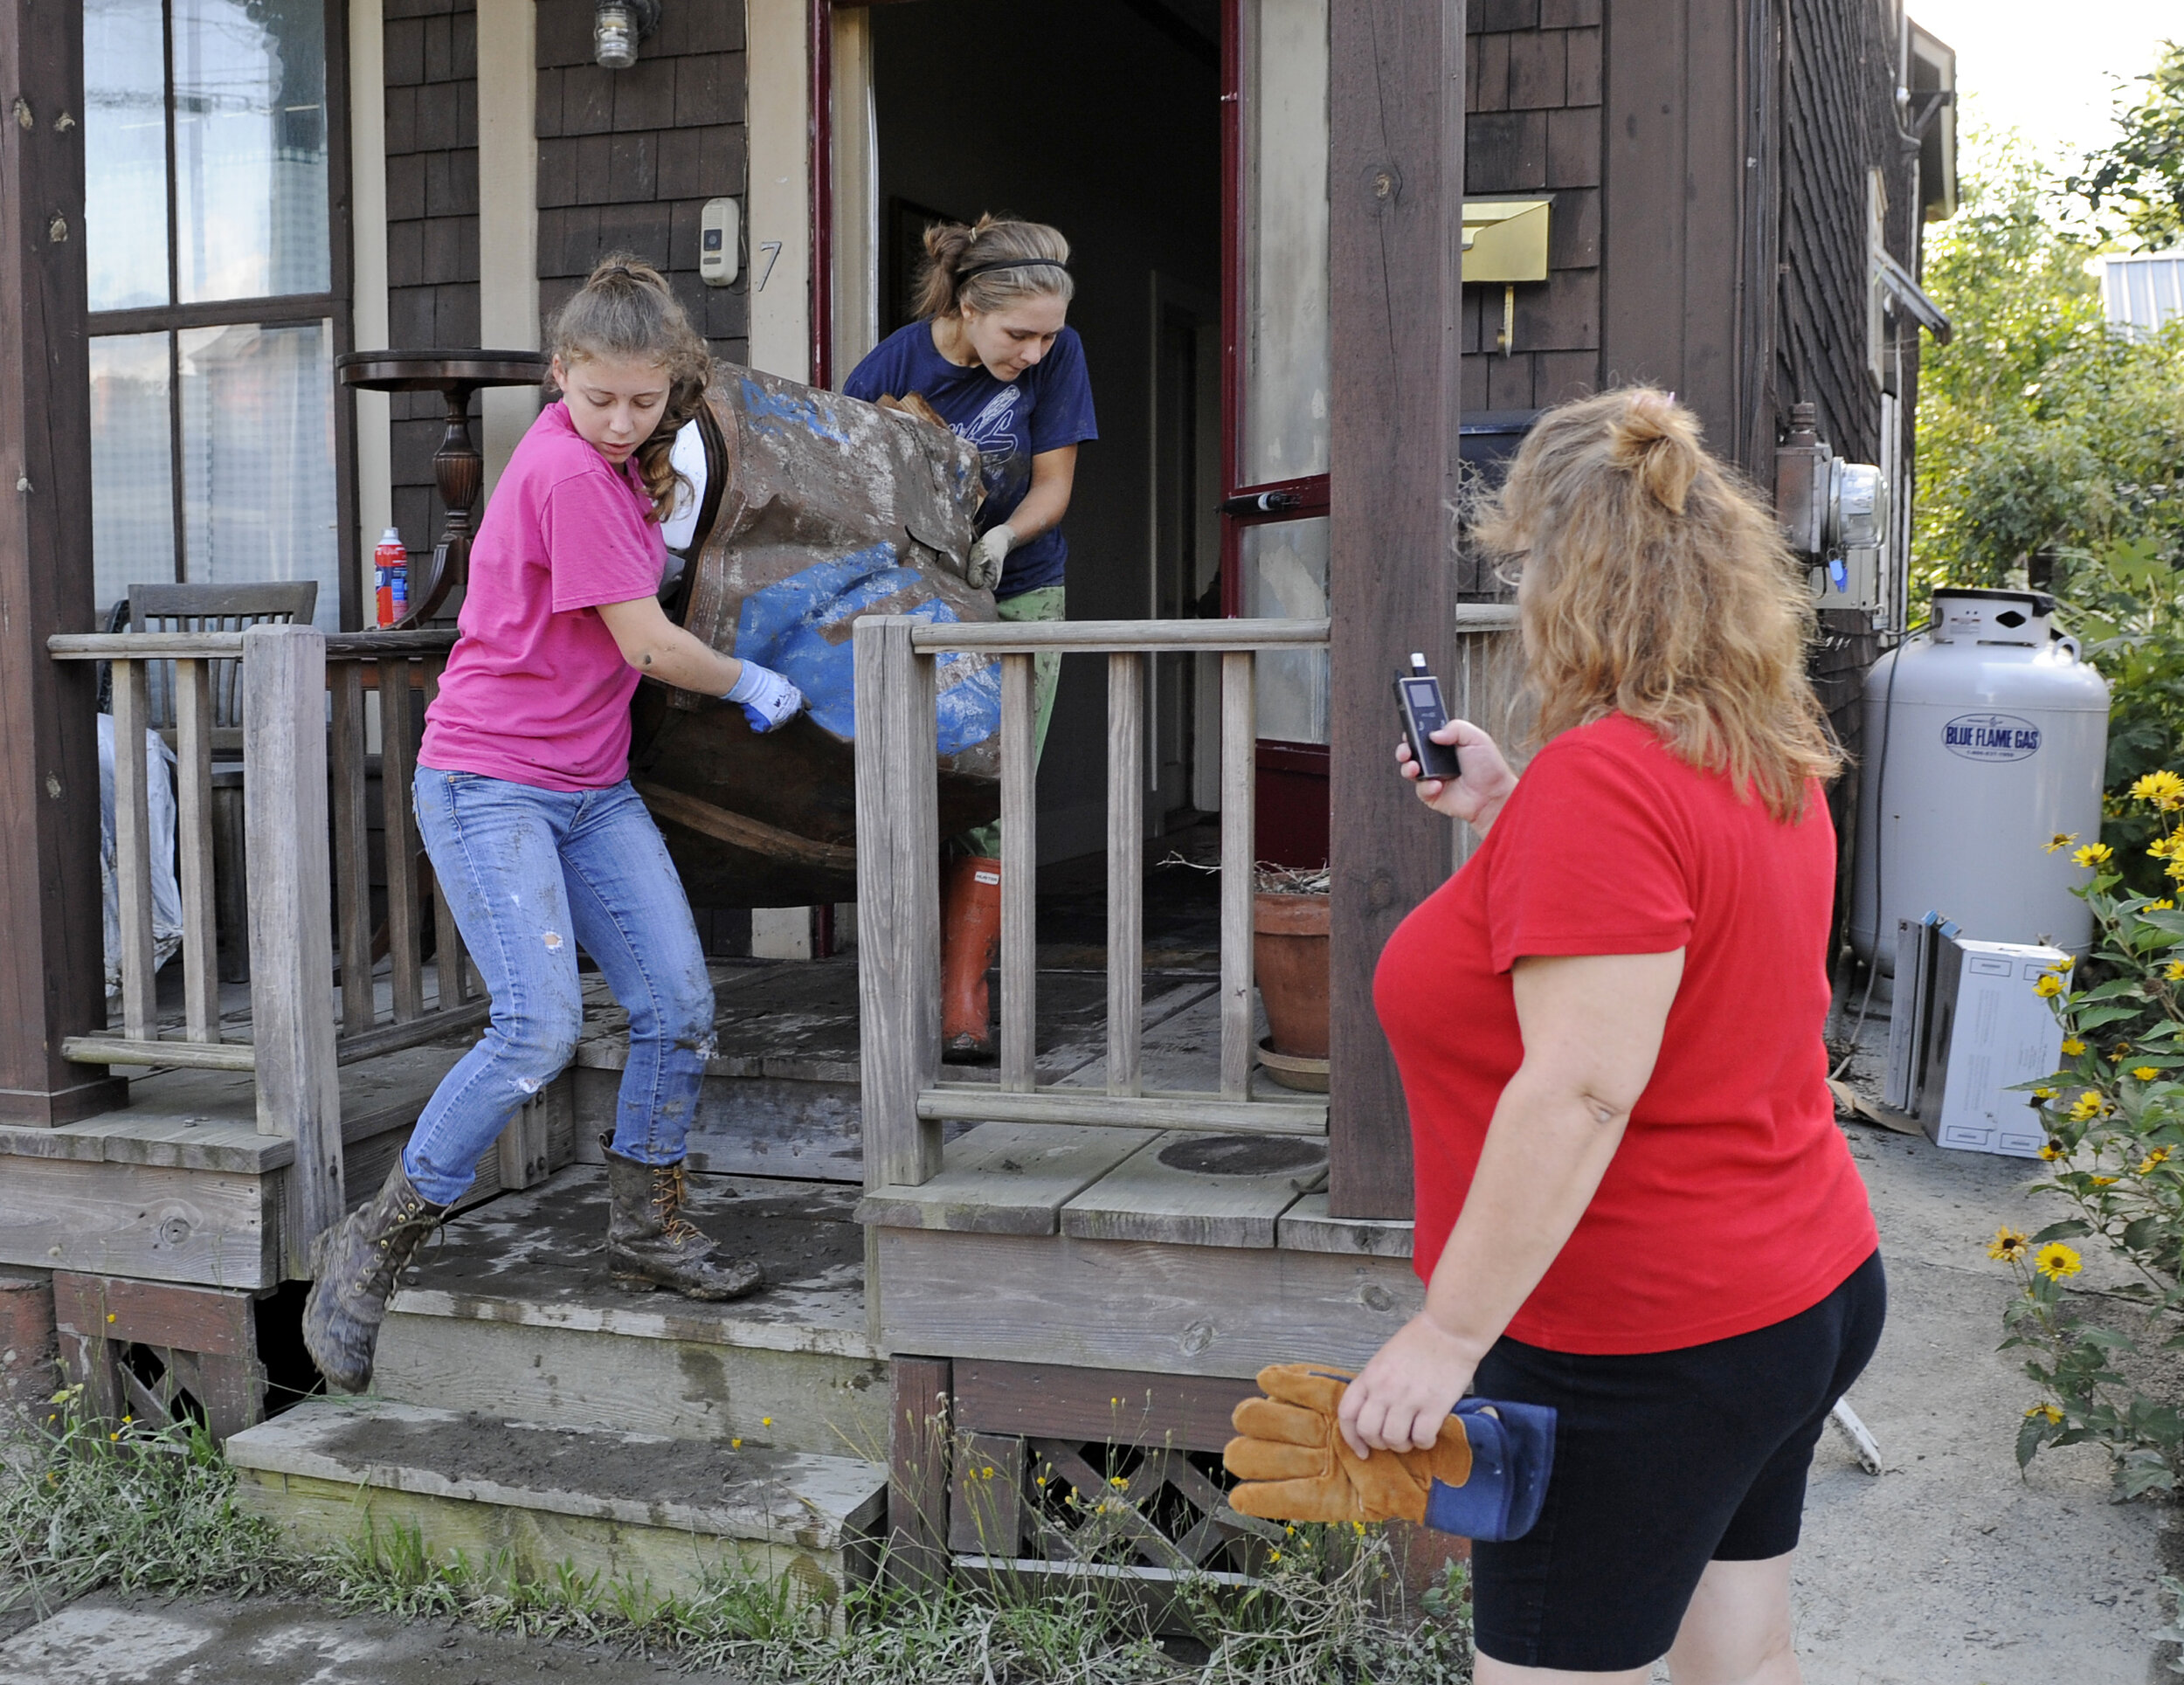  Volunteers went from home to home, in many cases meeting neighbors for the first time before helping haul possessions outside. Photo by Gordon Miller 